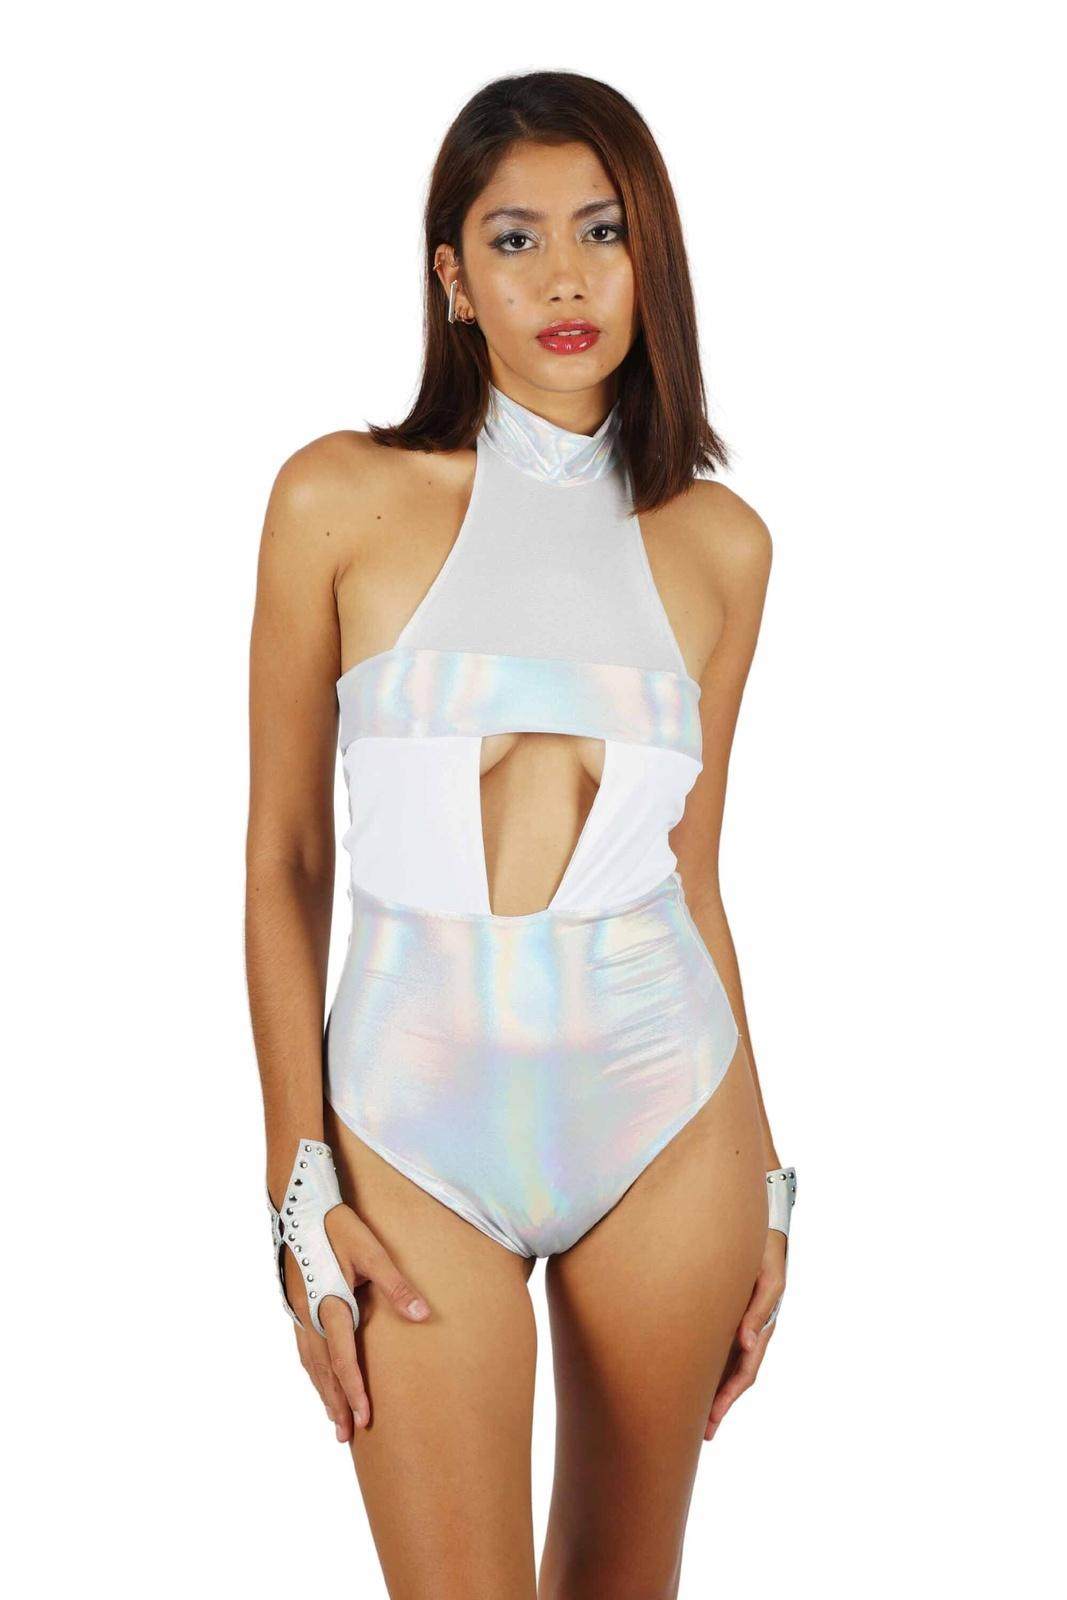  Holographic Silver High Neck Bodysuit with underboob cutout from Love Khaos.